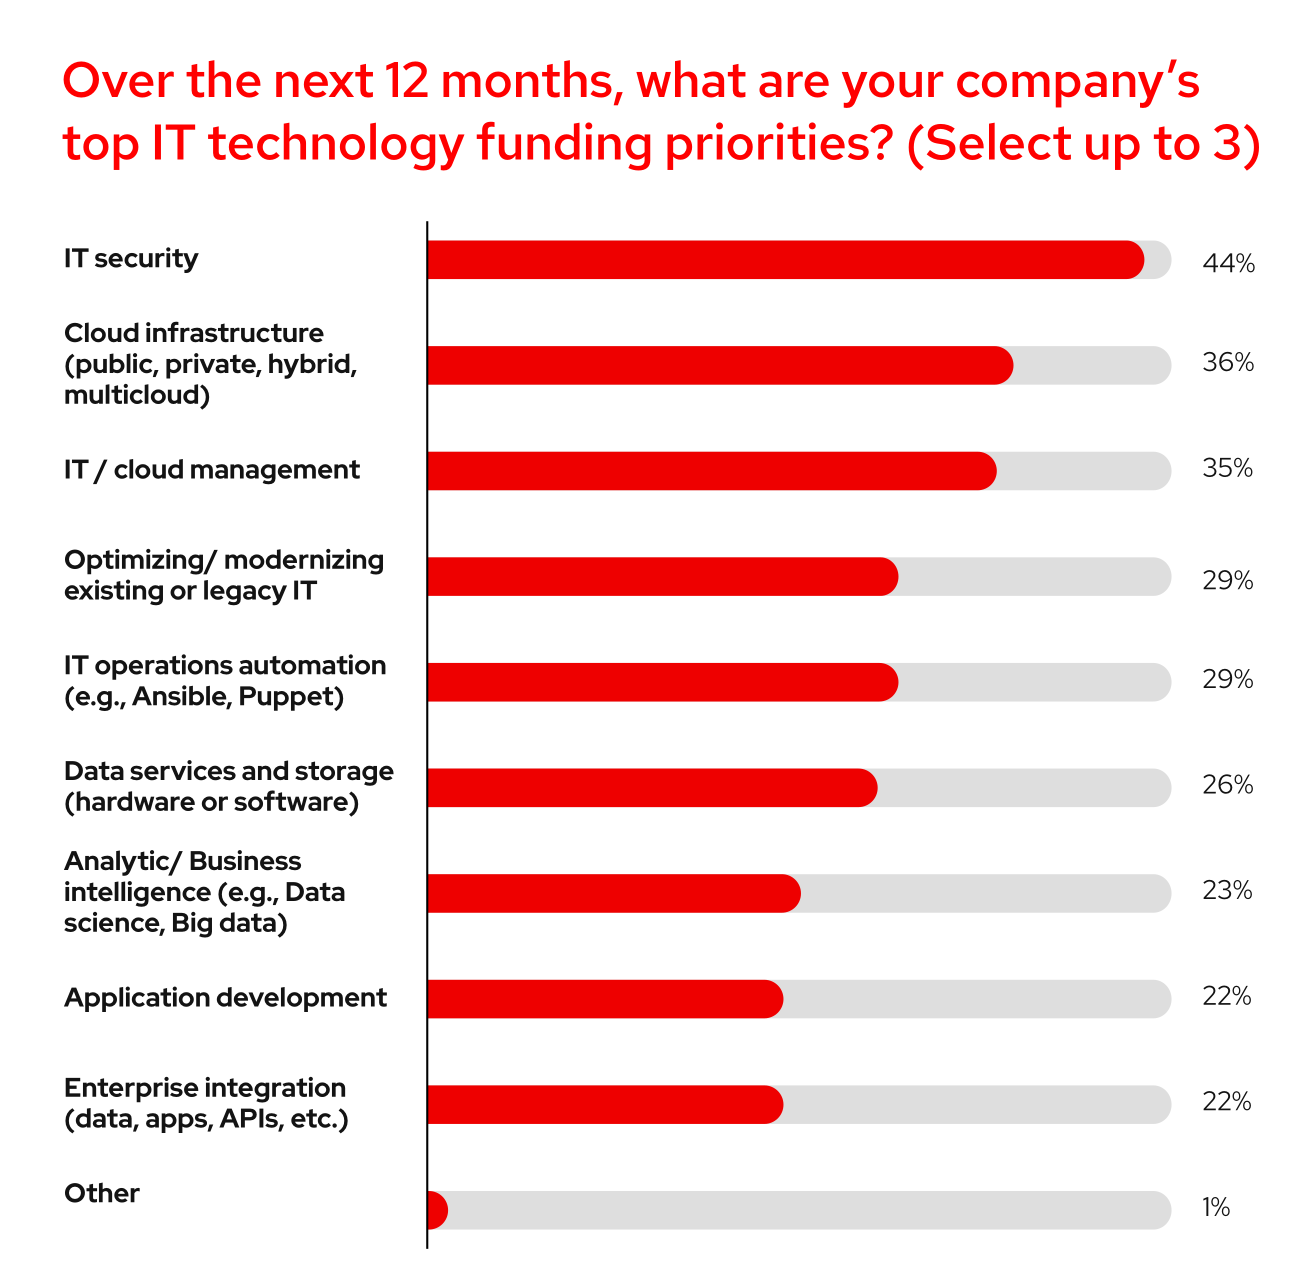 Over the next 12 months, what are your company’s top IT technology funding priorities?